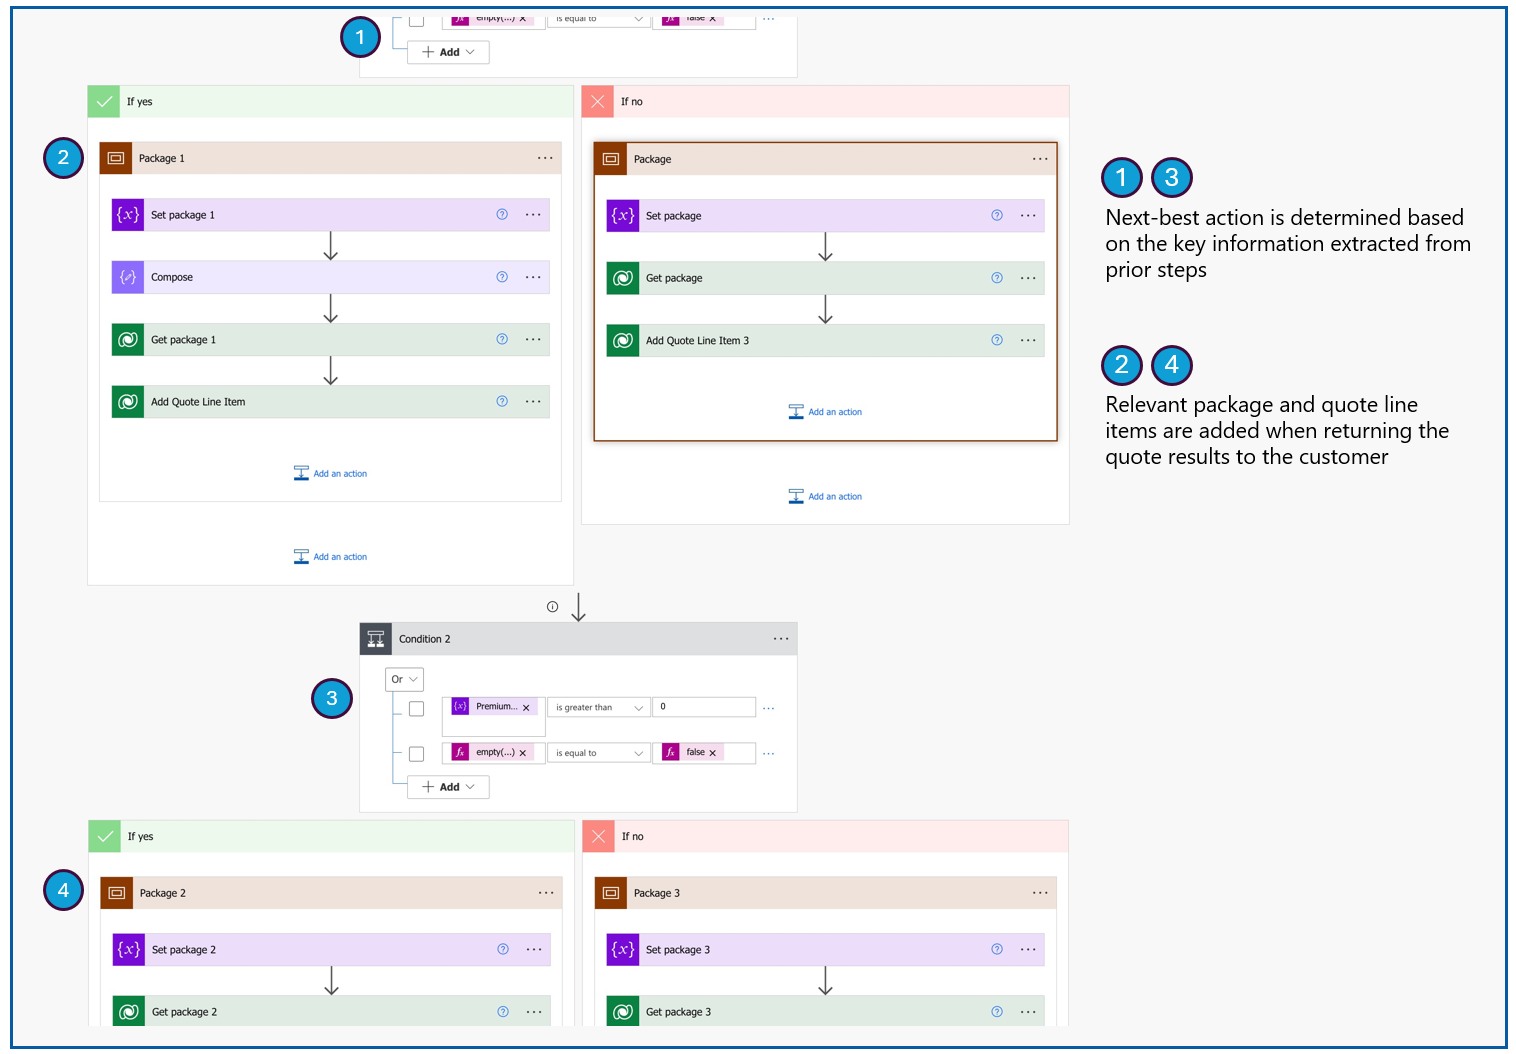 Screenshot of cloud flows configured for how next-best actions are deteremined based on results from the key information that was extracted in prior steps.